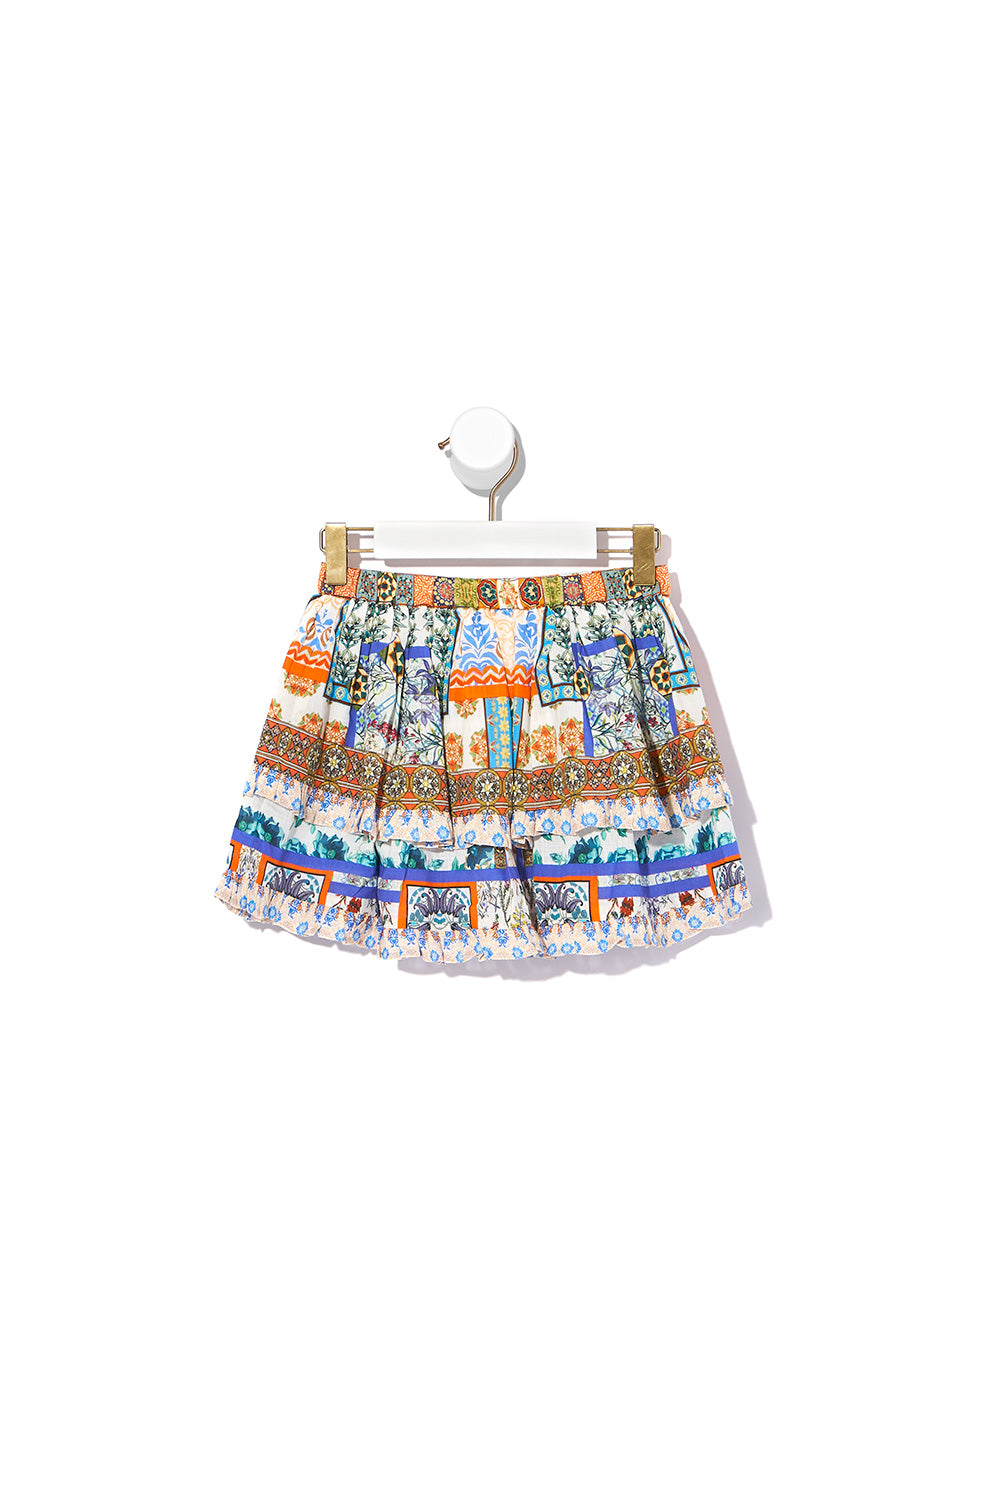 INFANTS DOUBLE LAYER FRILL SKIRT GONE COAST